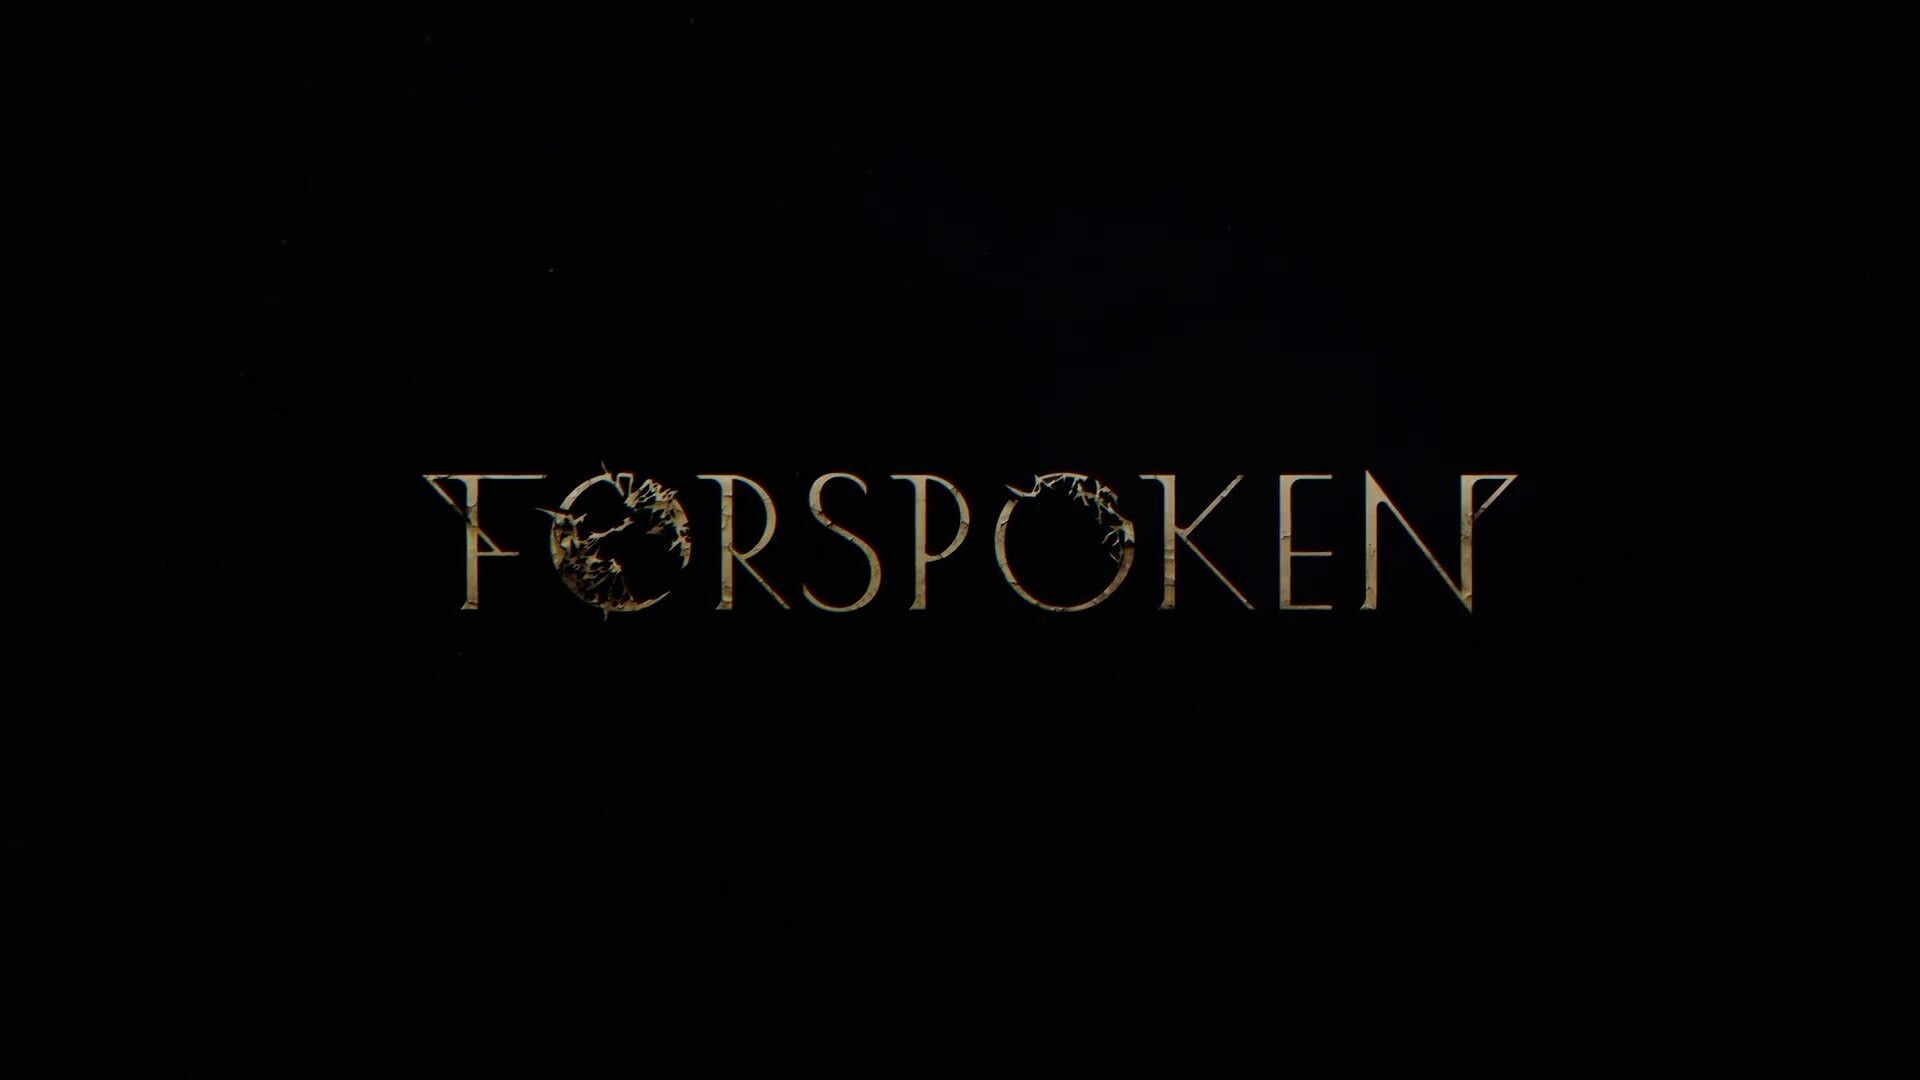 Forspoken: An open world, action role-playing game in which players take control of protagonist Frey Holland. 1920x1080 Full HD Wallpaper.